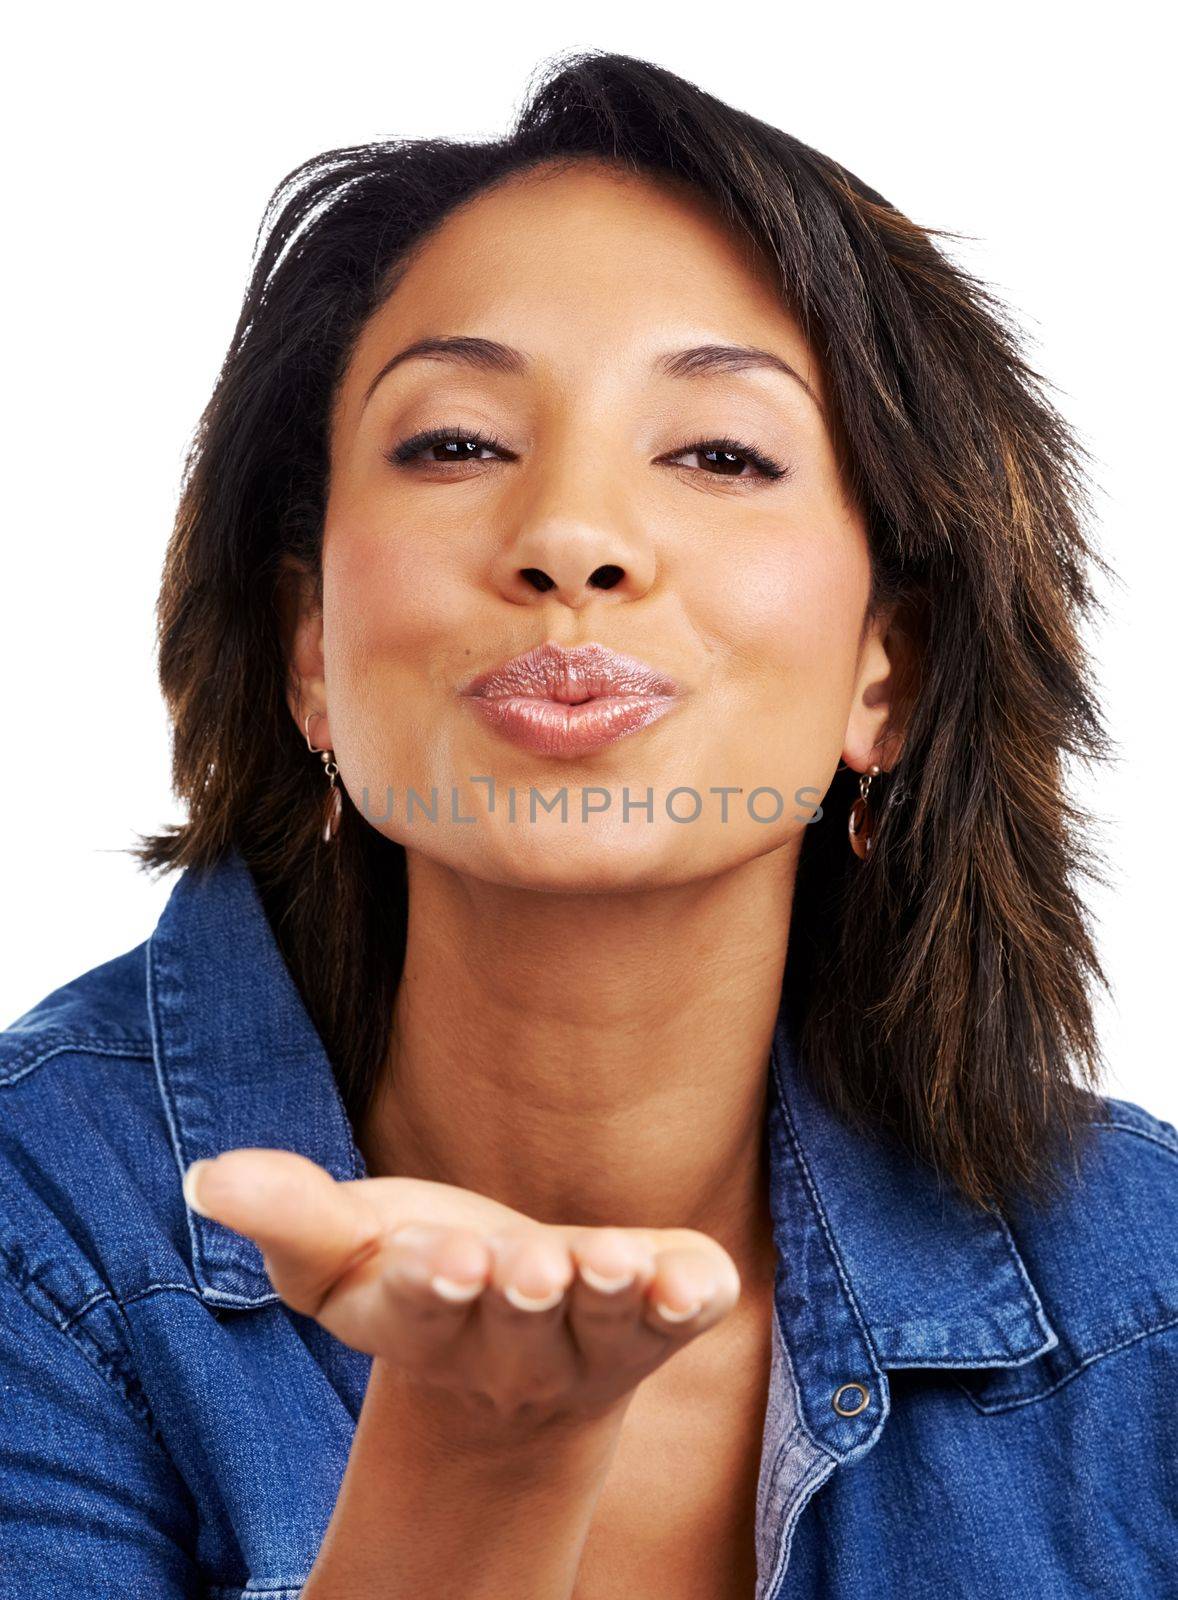 Black woman, portrait or blowing kiss on isolated white background in love, care or romance gesture. Happy smile, model or hand kisses on mockup studio backdrop in flirty facial expression or emoji.